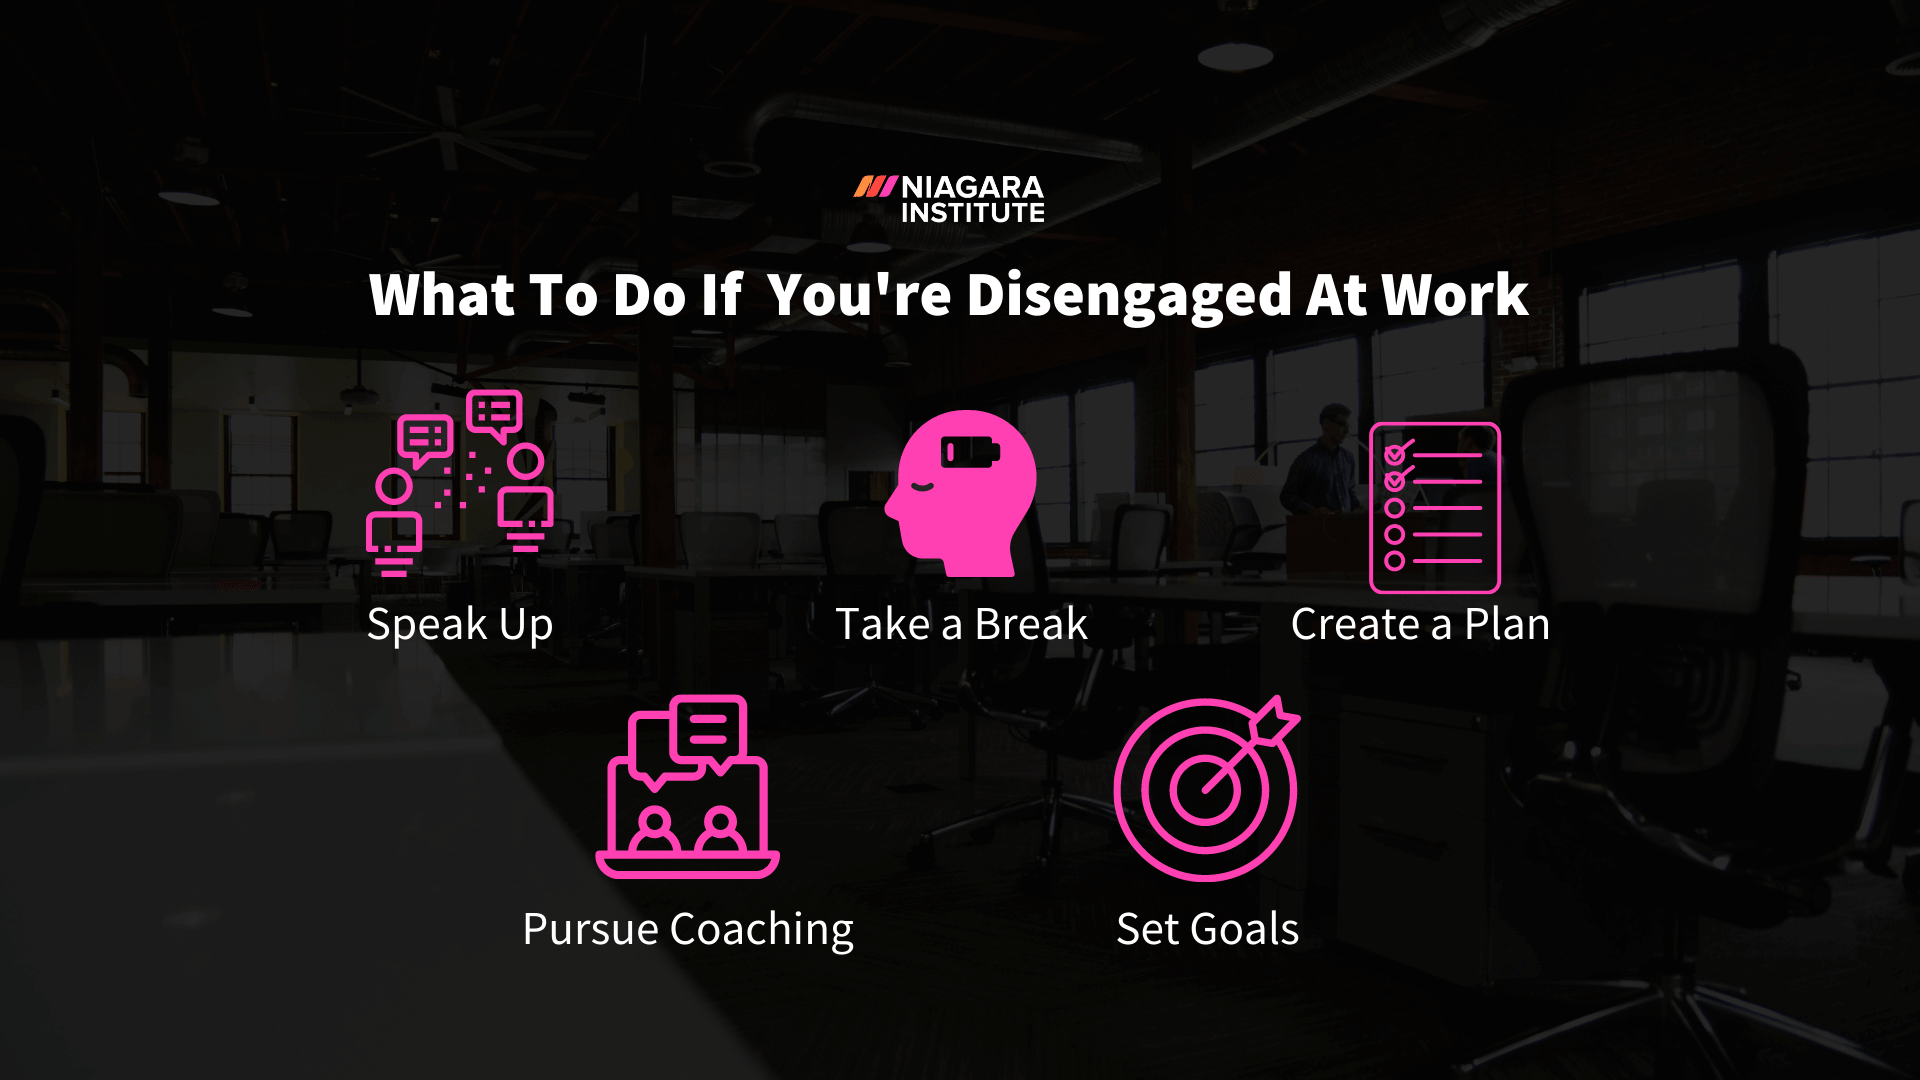 Disengaged at Work What To Do - Niagara Institute 